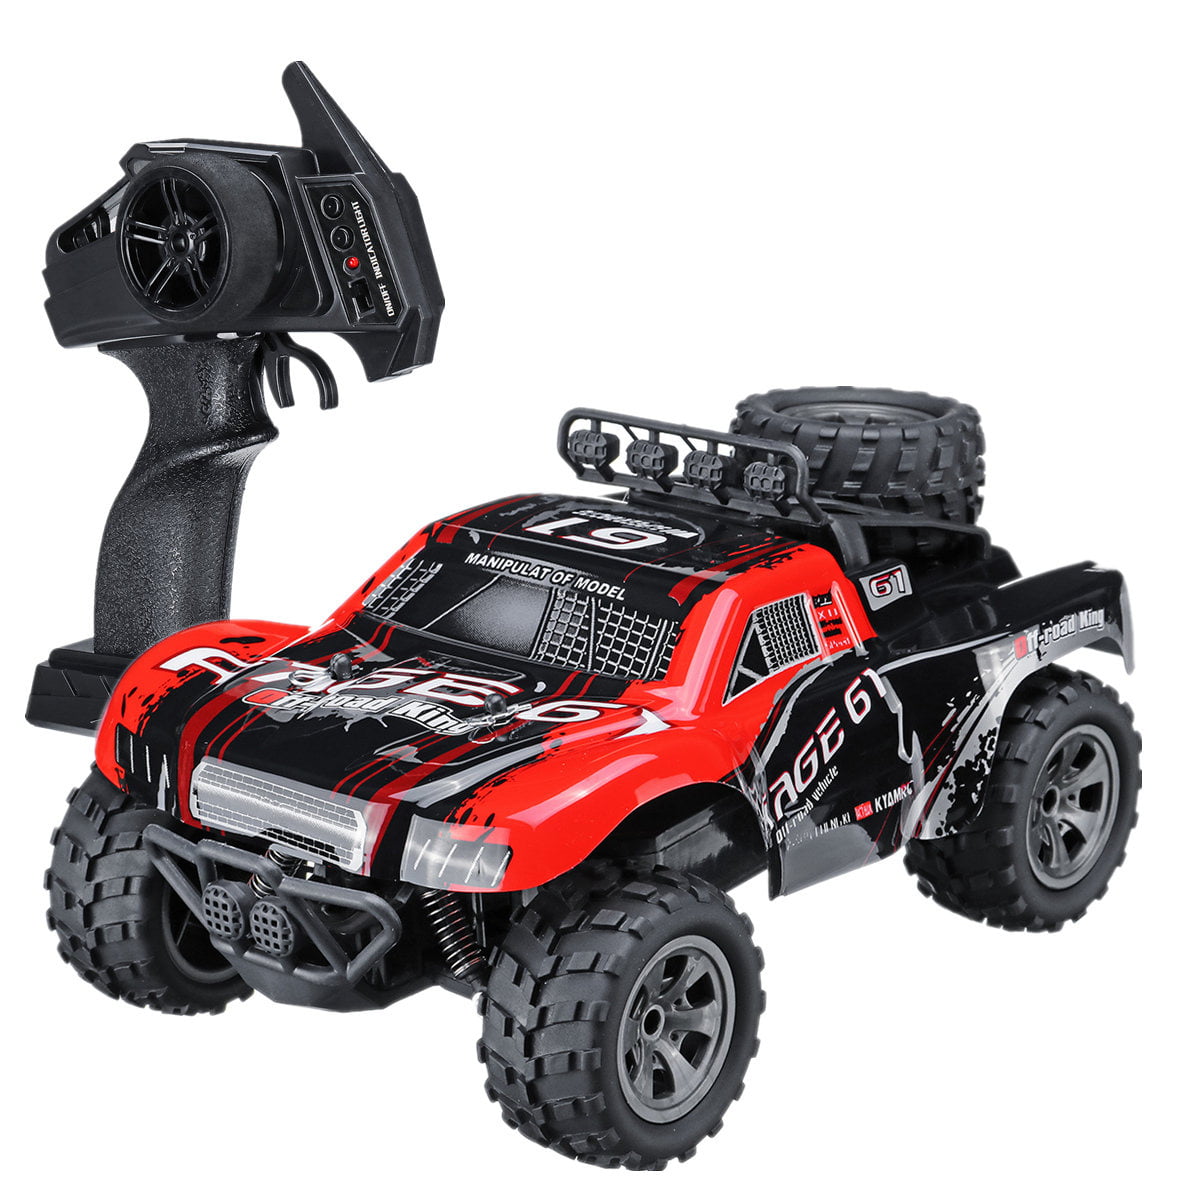 2.4GHz 1/18 Scale RC Car Remote Control Car 4WD RC Truck Car Monster ...